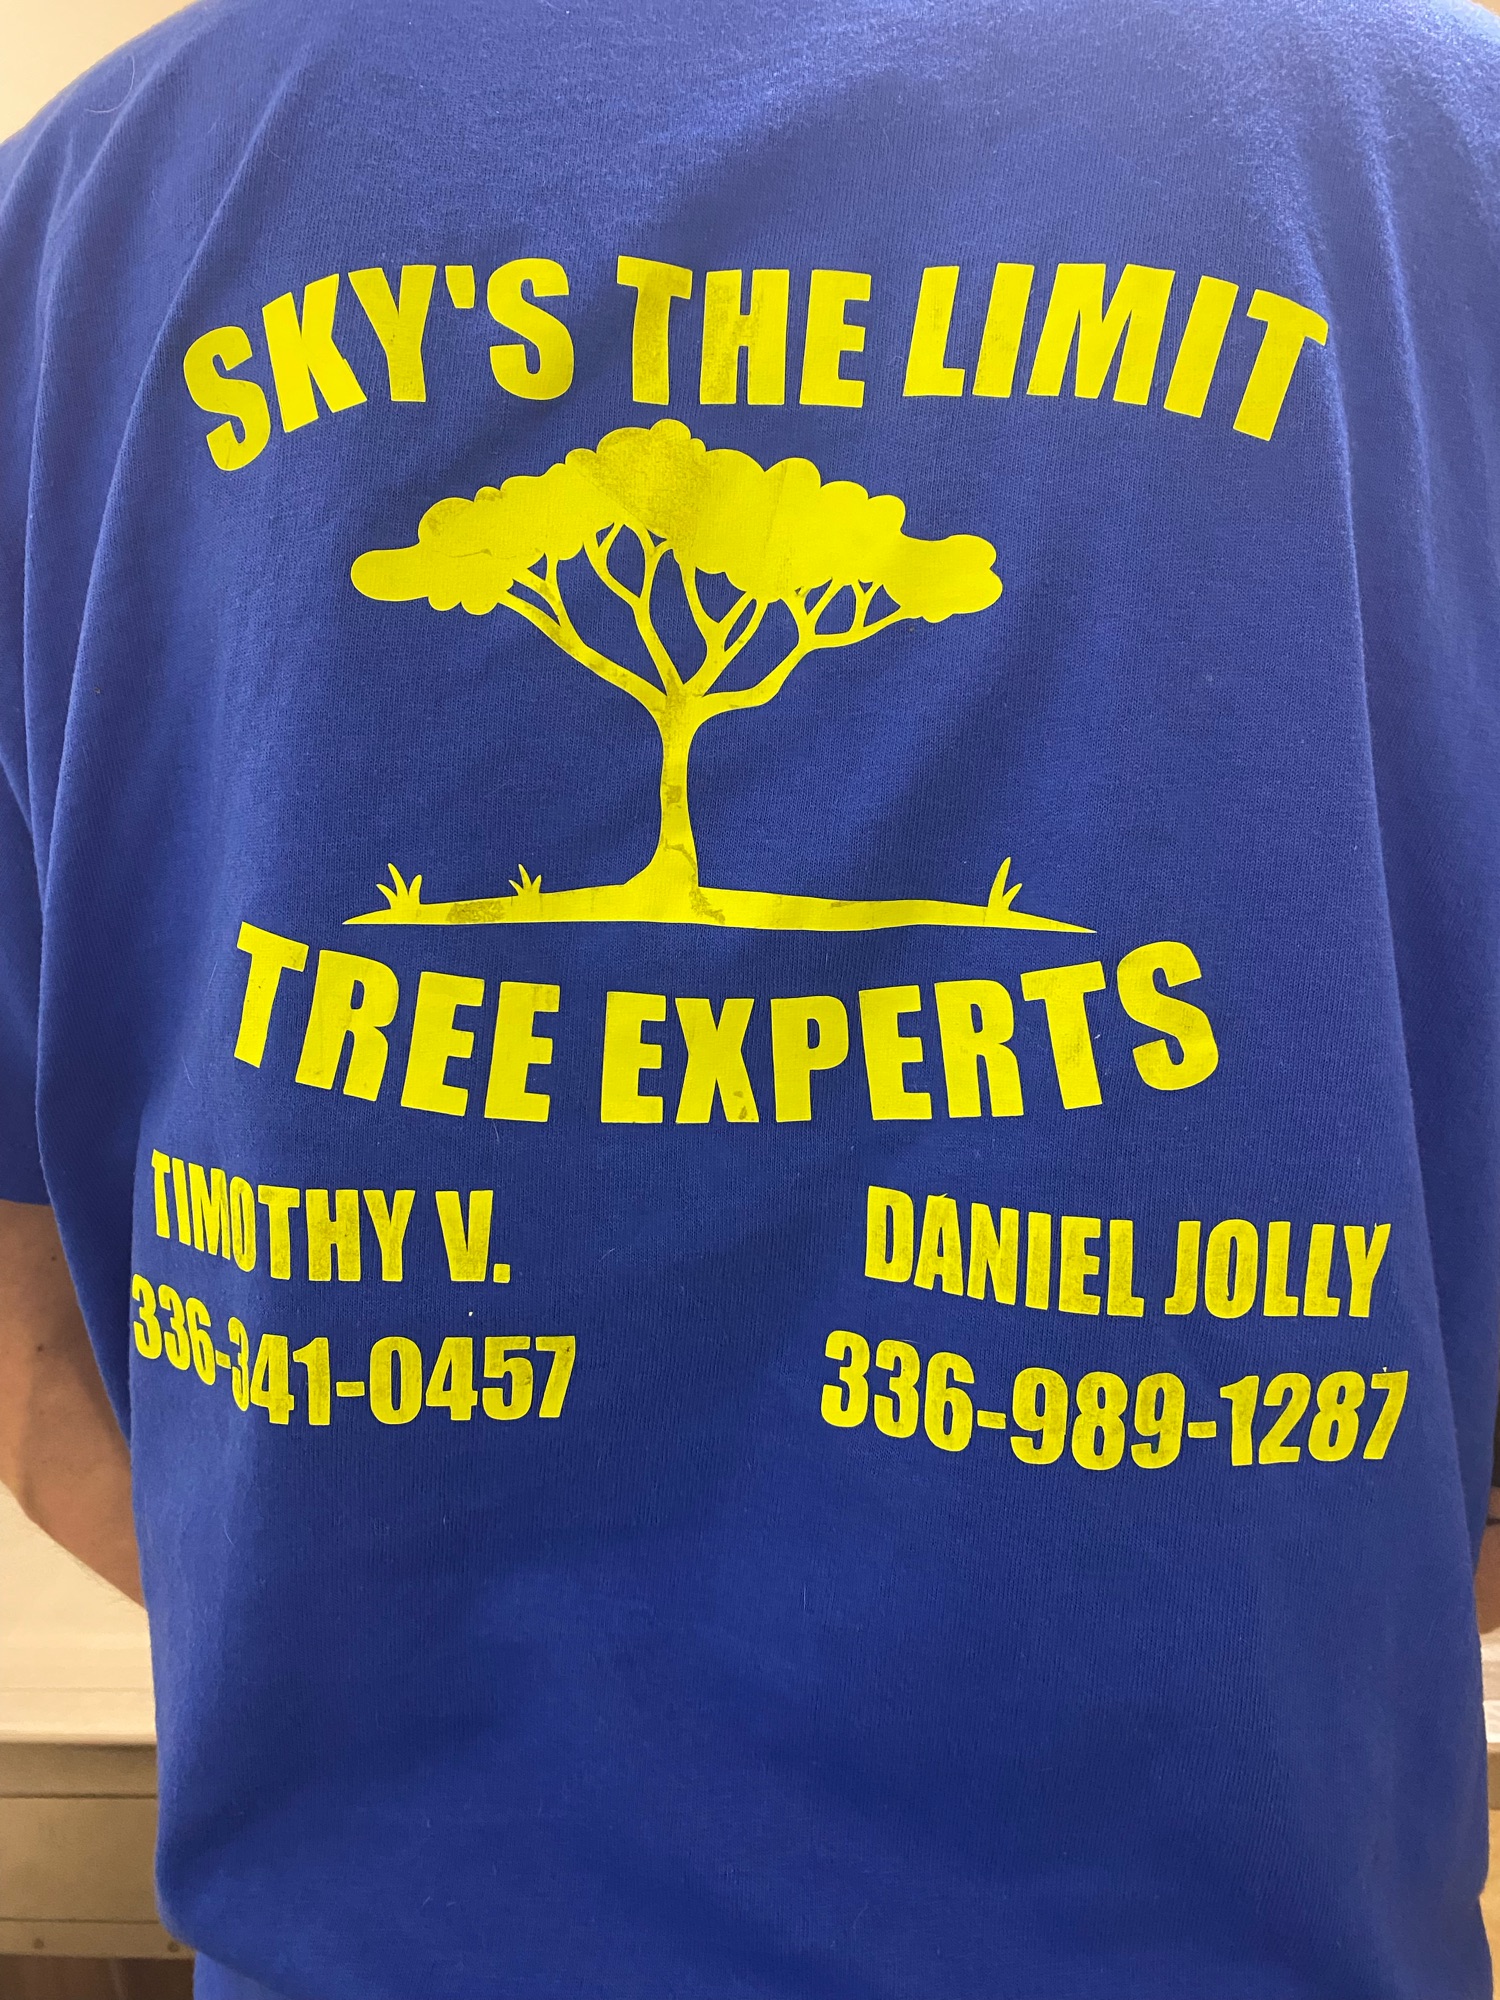 Sky's The Limit Tree Experts Logo